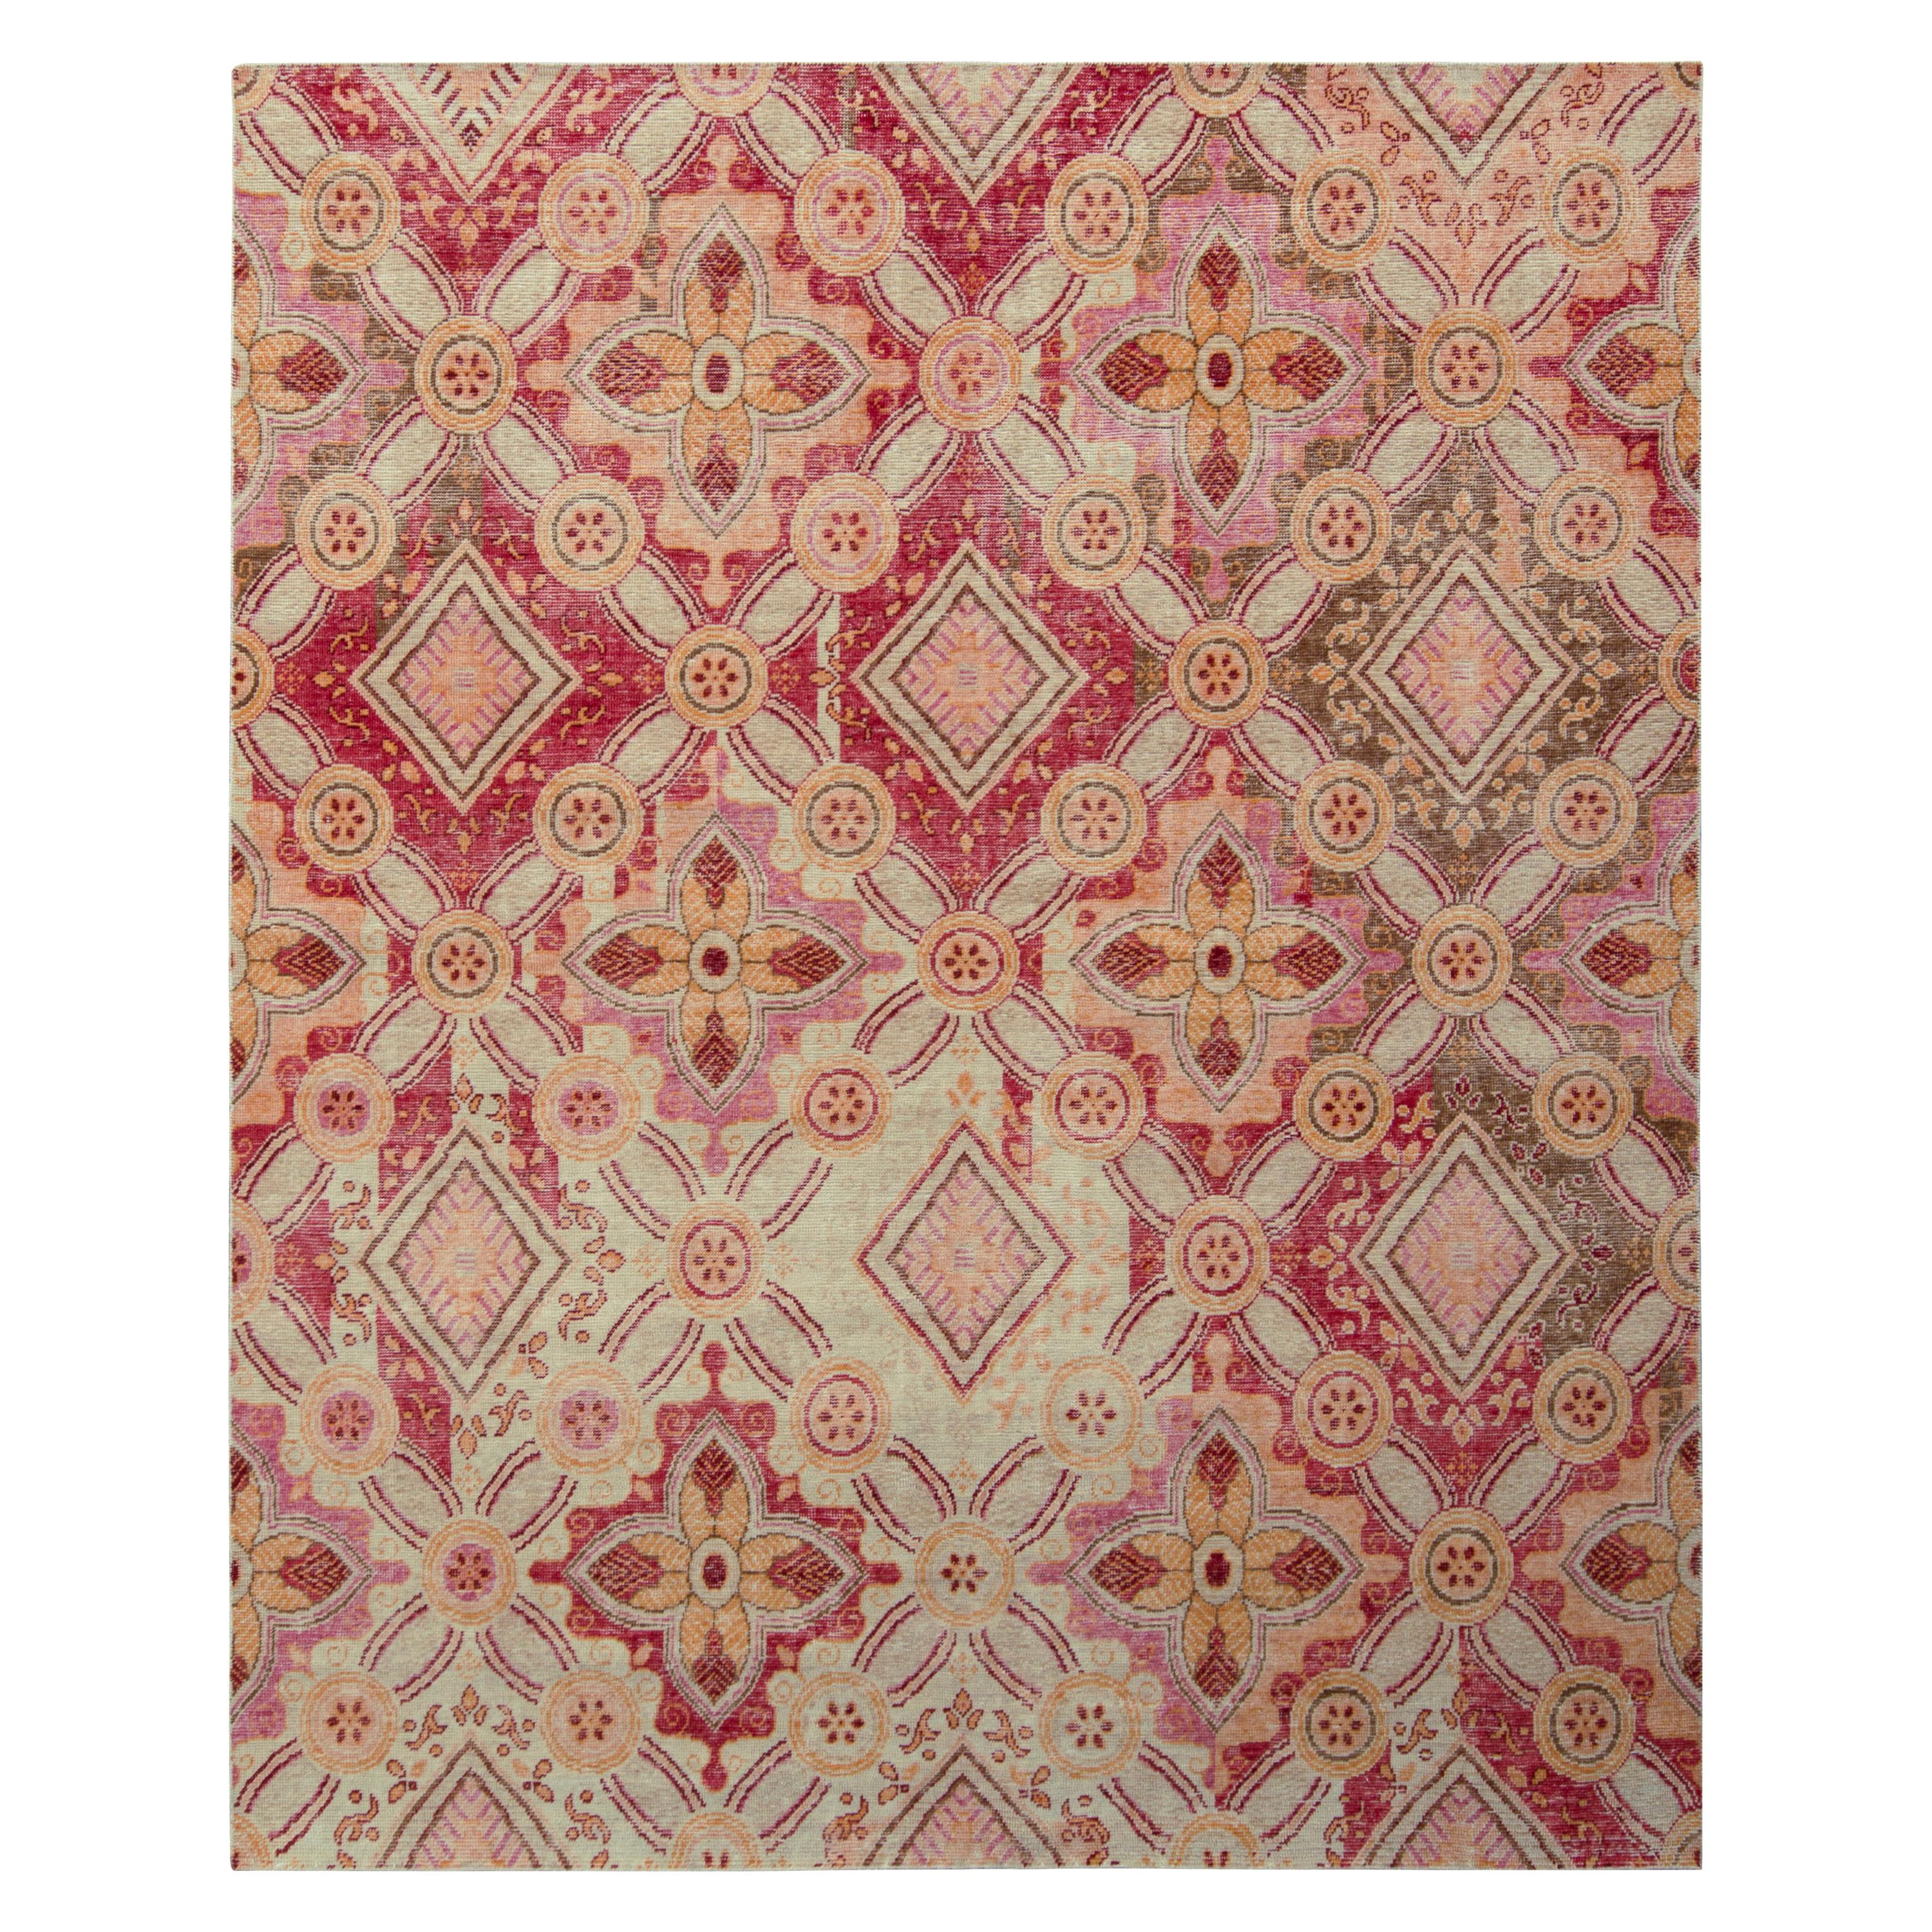 Rug & Kilim’s Distressed Style Floral Rug in Red and Pink Classic Floral Pattern For Sale